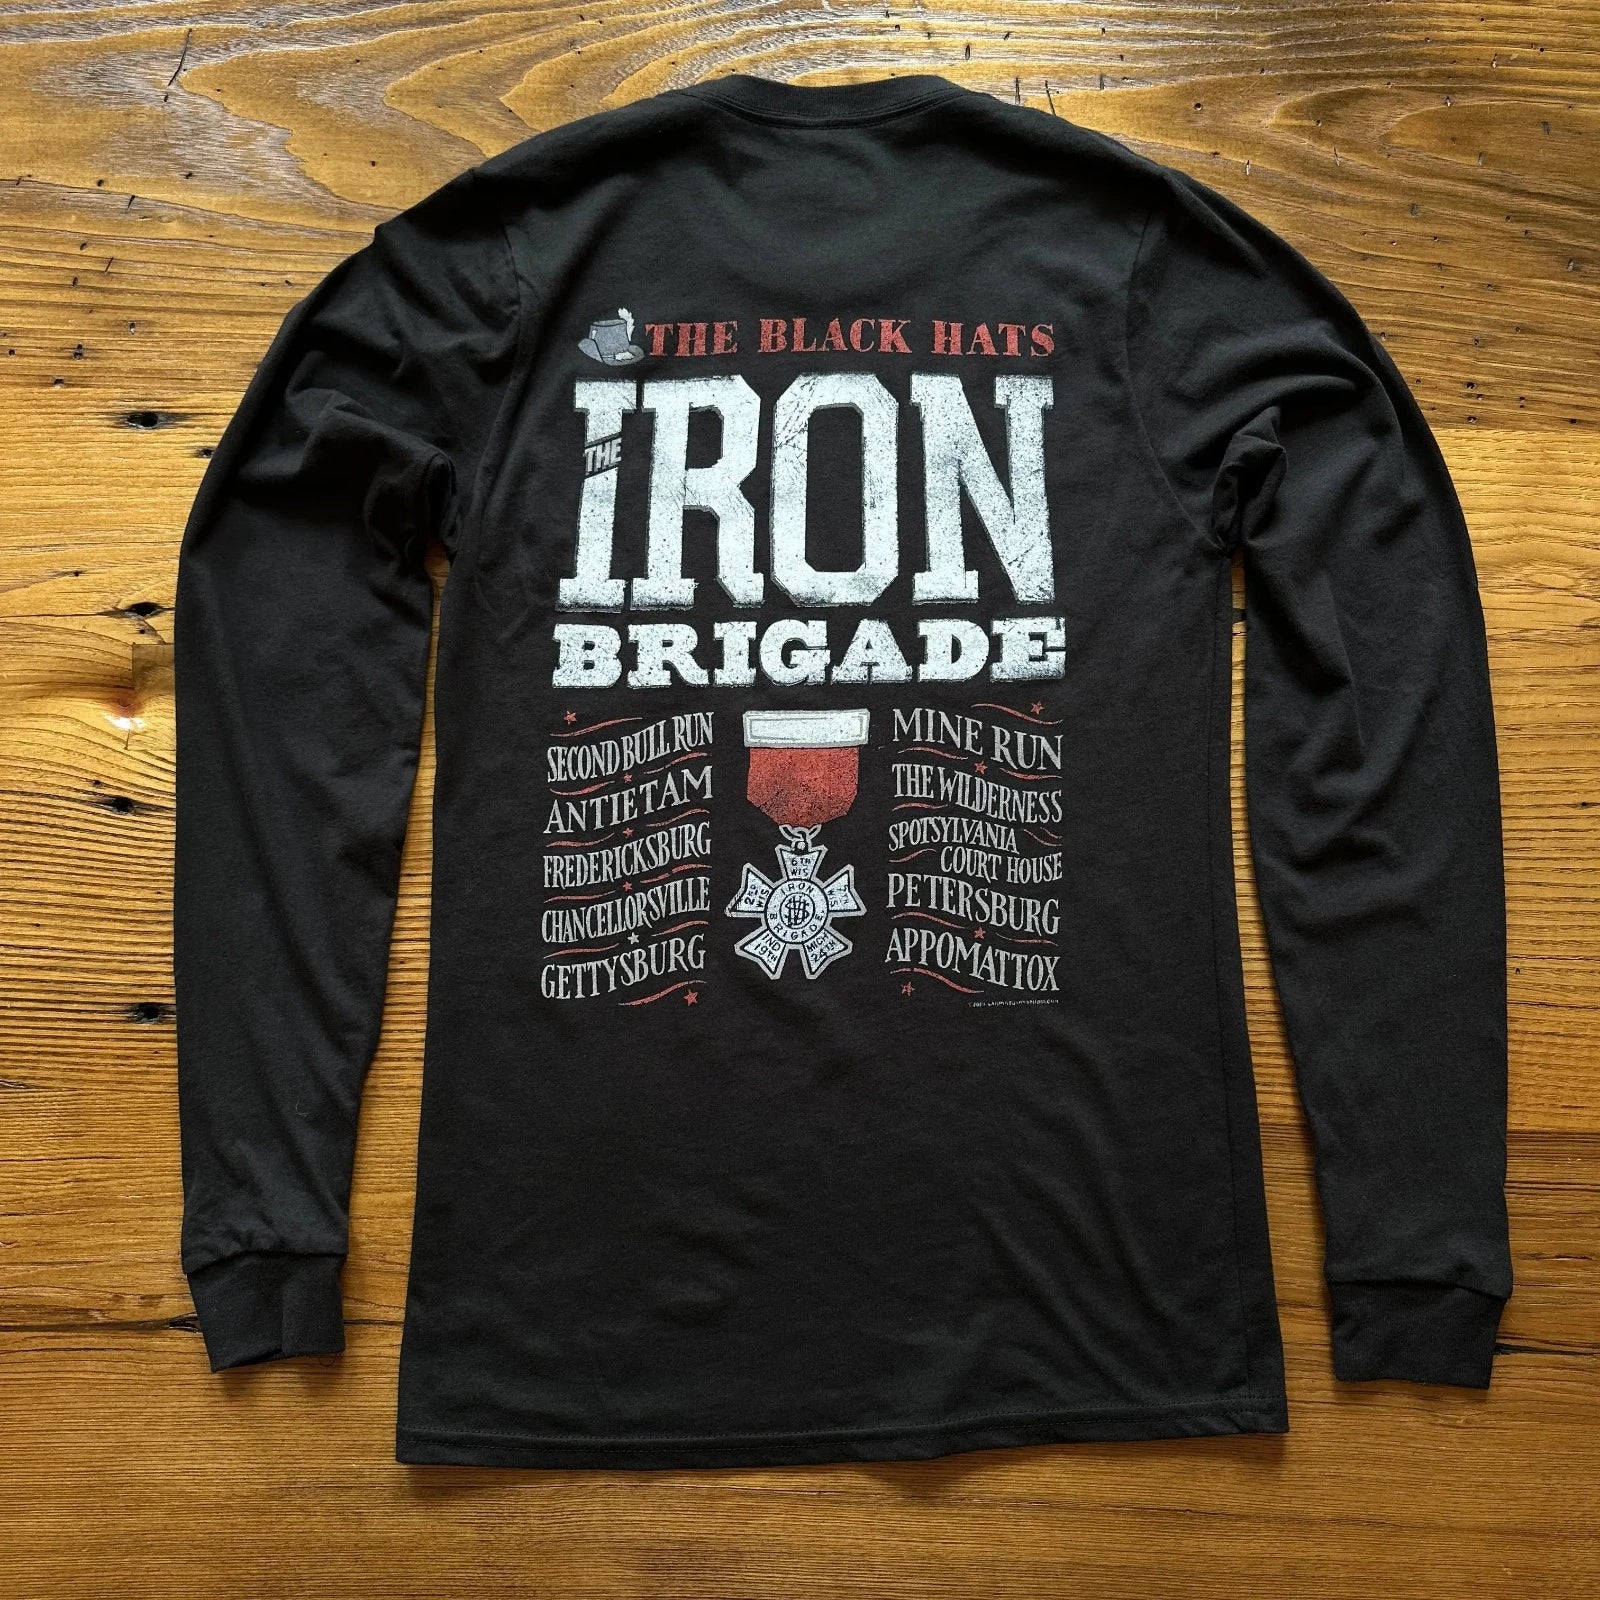 Back of The Civil War "Iron Brigade" Long-Sleeved Shirt Made in America from The History List store